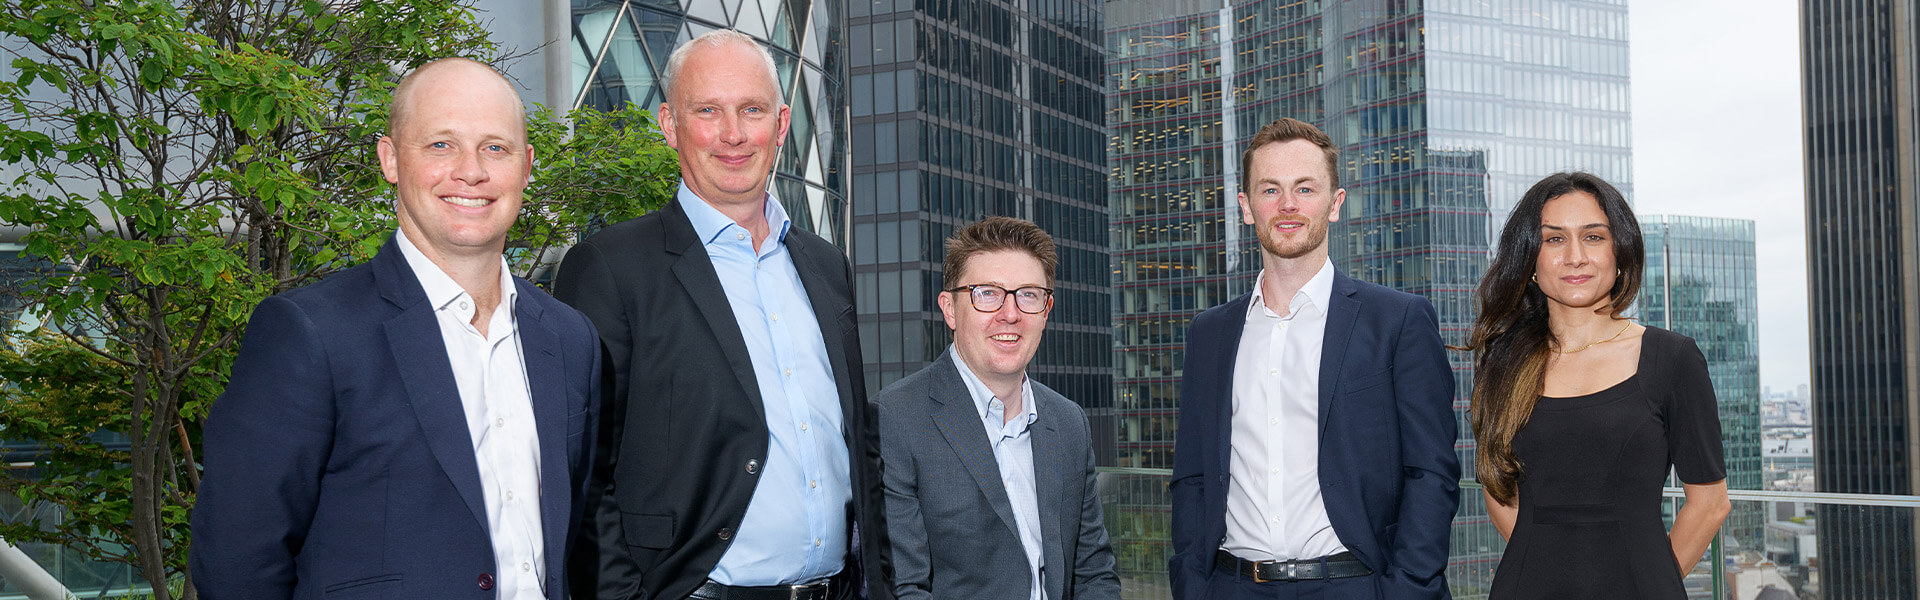 Browne Jacobson expands significantly in London with Technology and Commercial team hire from EY Law